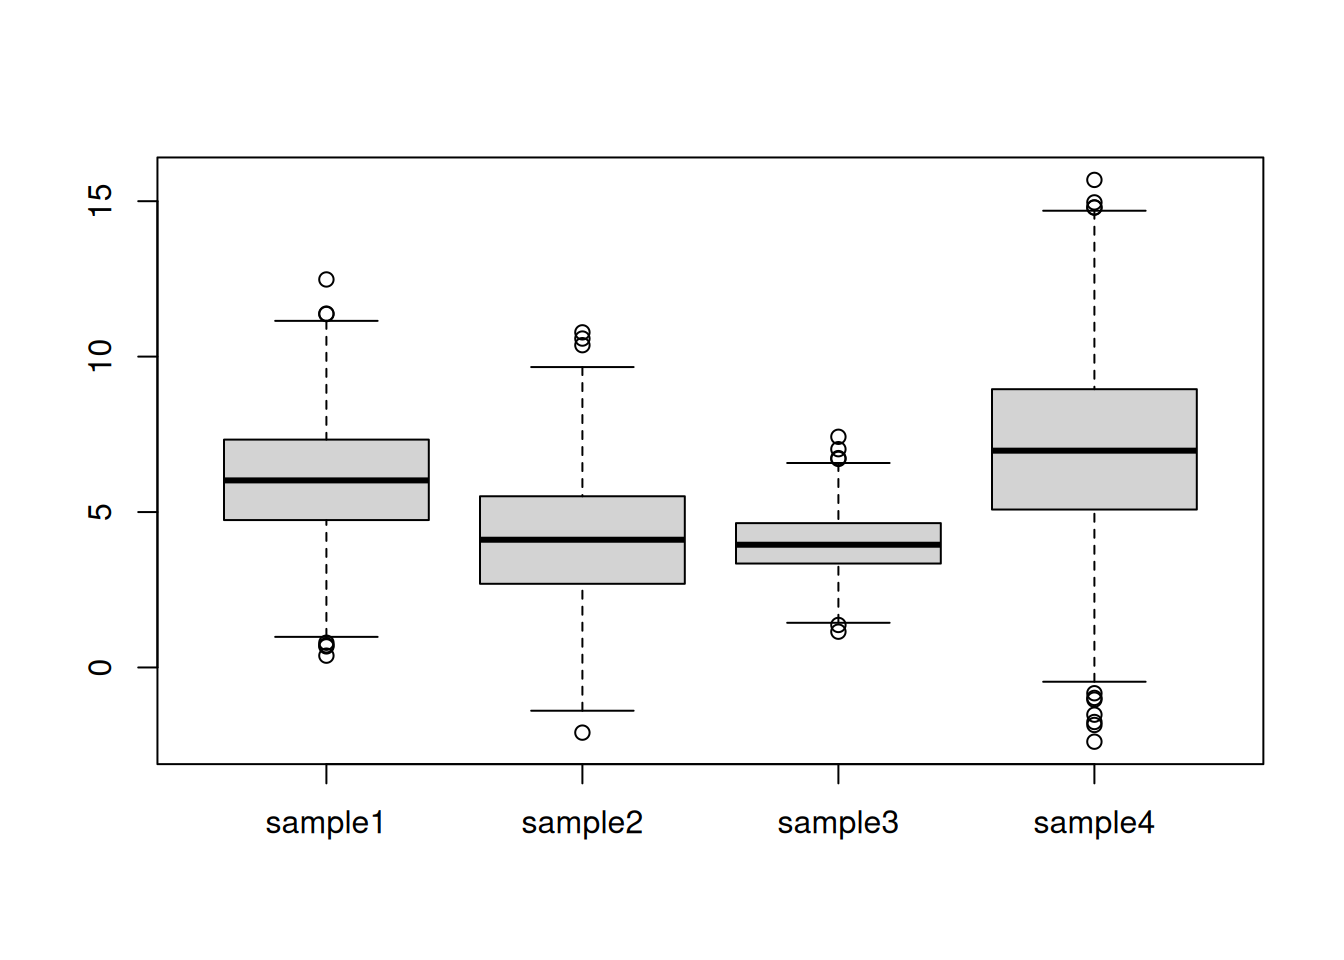 Simulated data for 4 samples and 1000 genes.